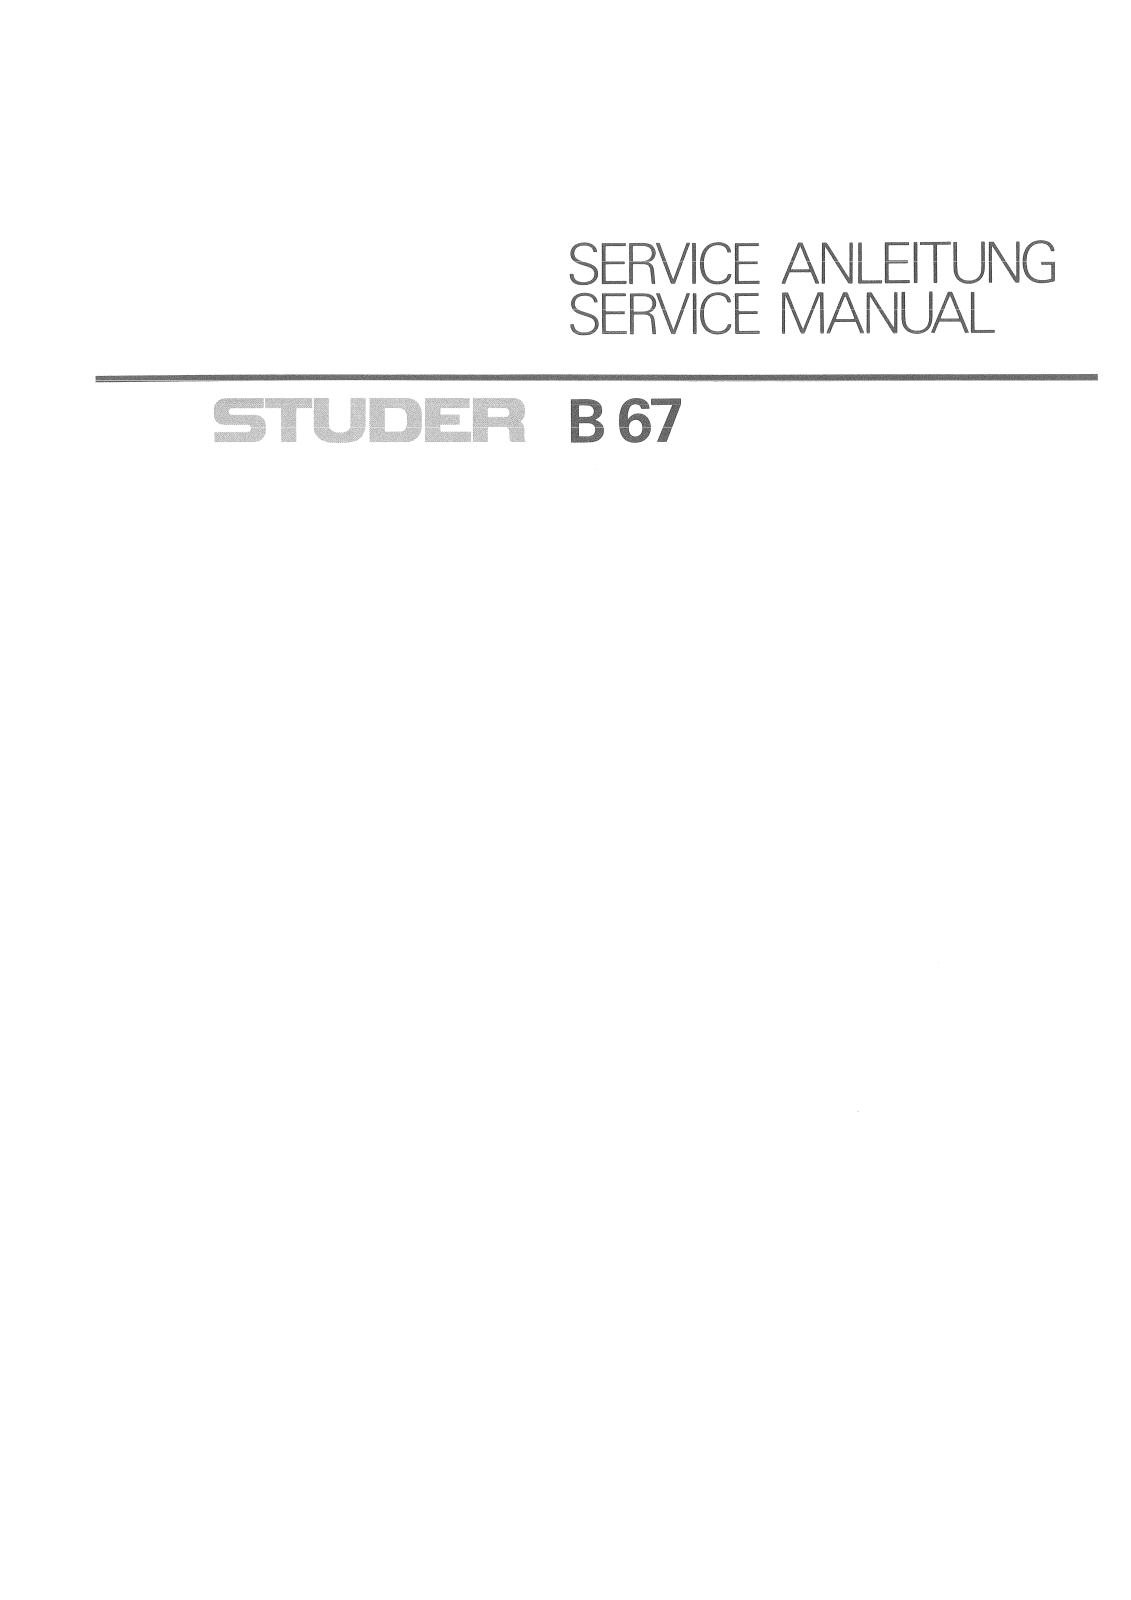 Operating and Service Instructions/Serviceanleitung for Studer B67 MKII 